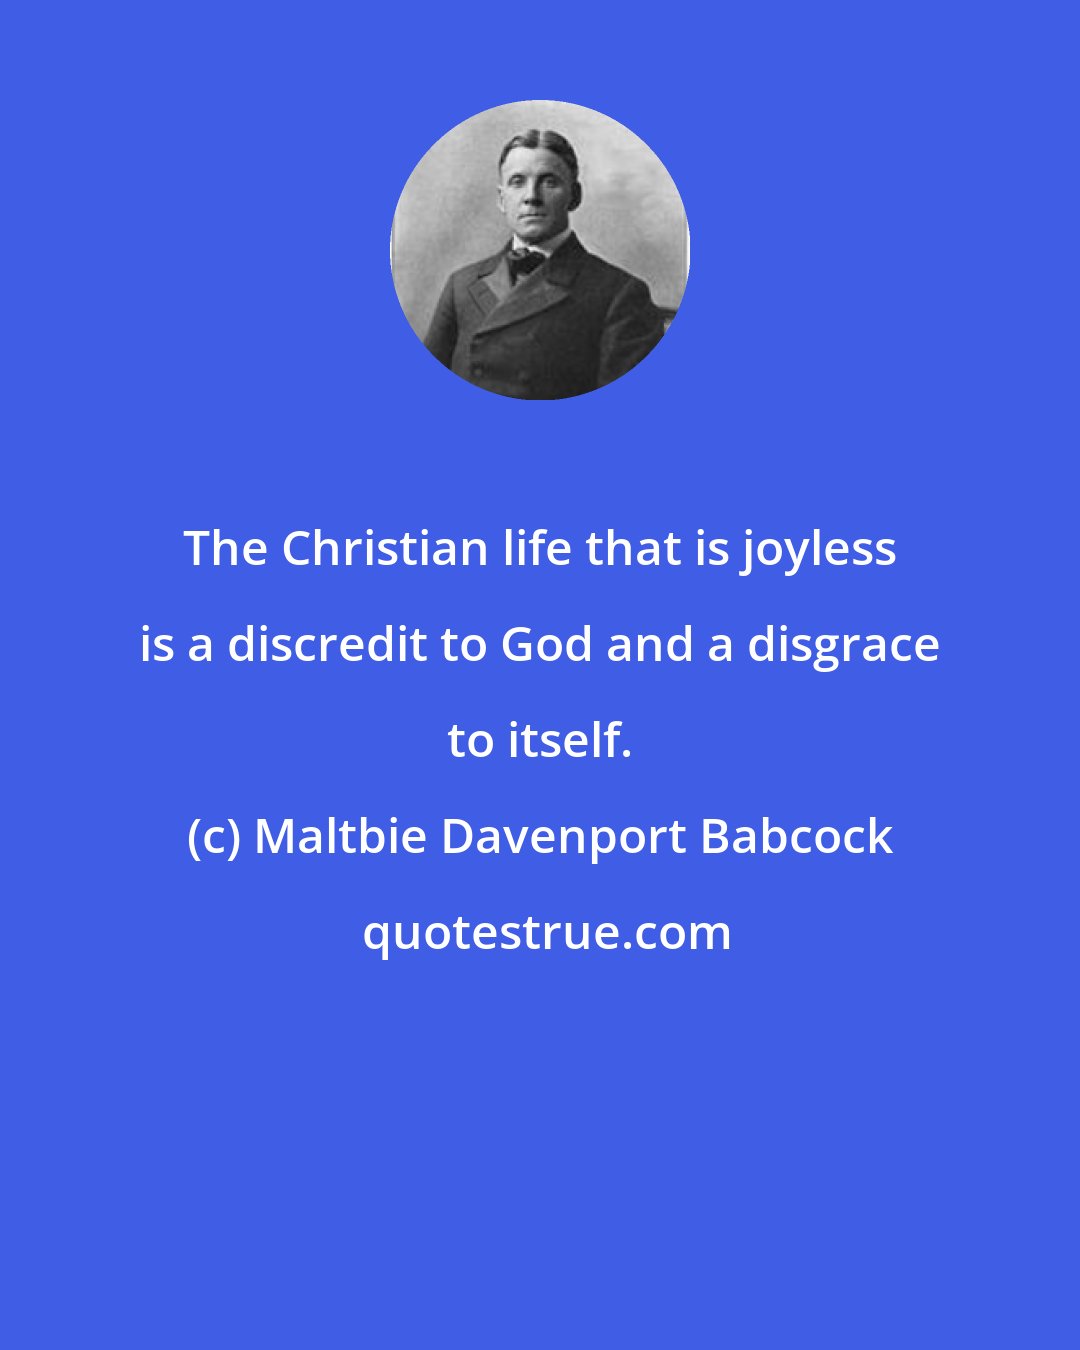 Maltbie Davenport Babcock: The Christian life that is joyless is a discredit to God and a disgrace to itself.